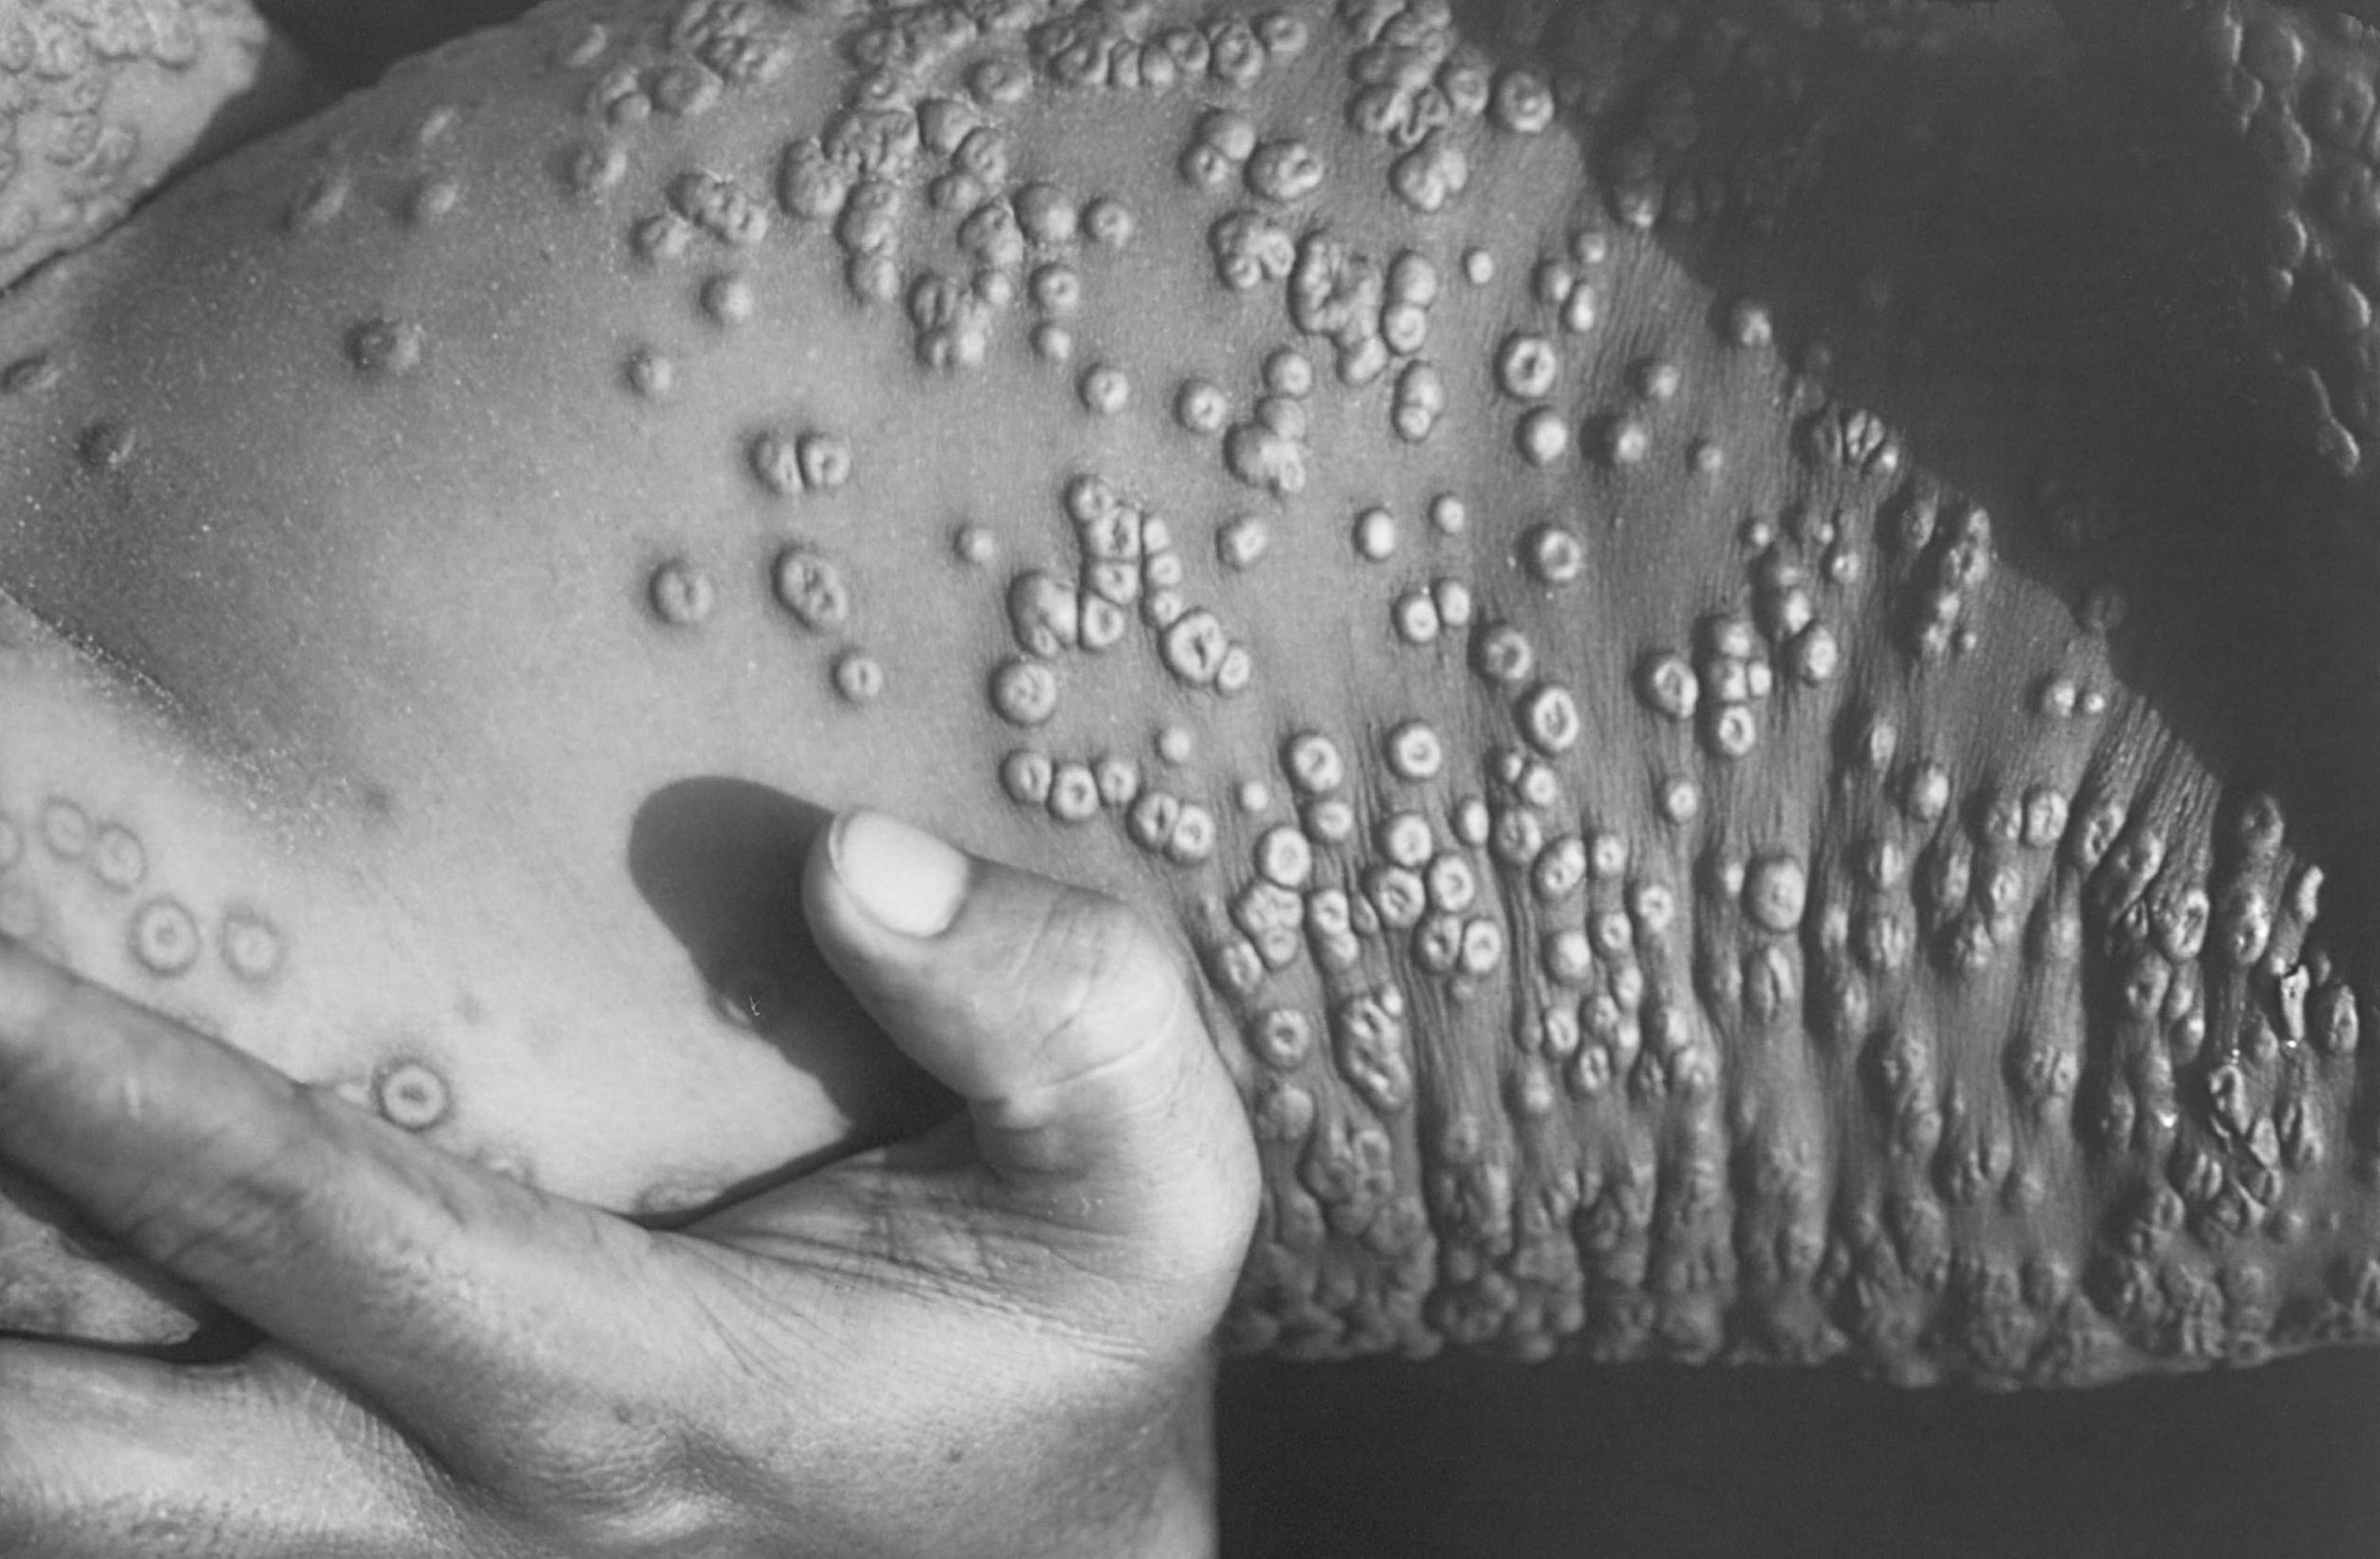 PHOTO: Smallpox legions are shown on a patient in this 1973 photograph in Bangladesh.